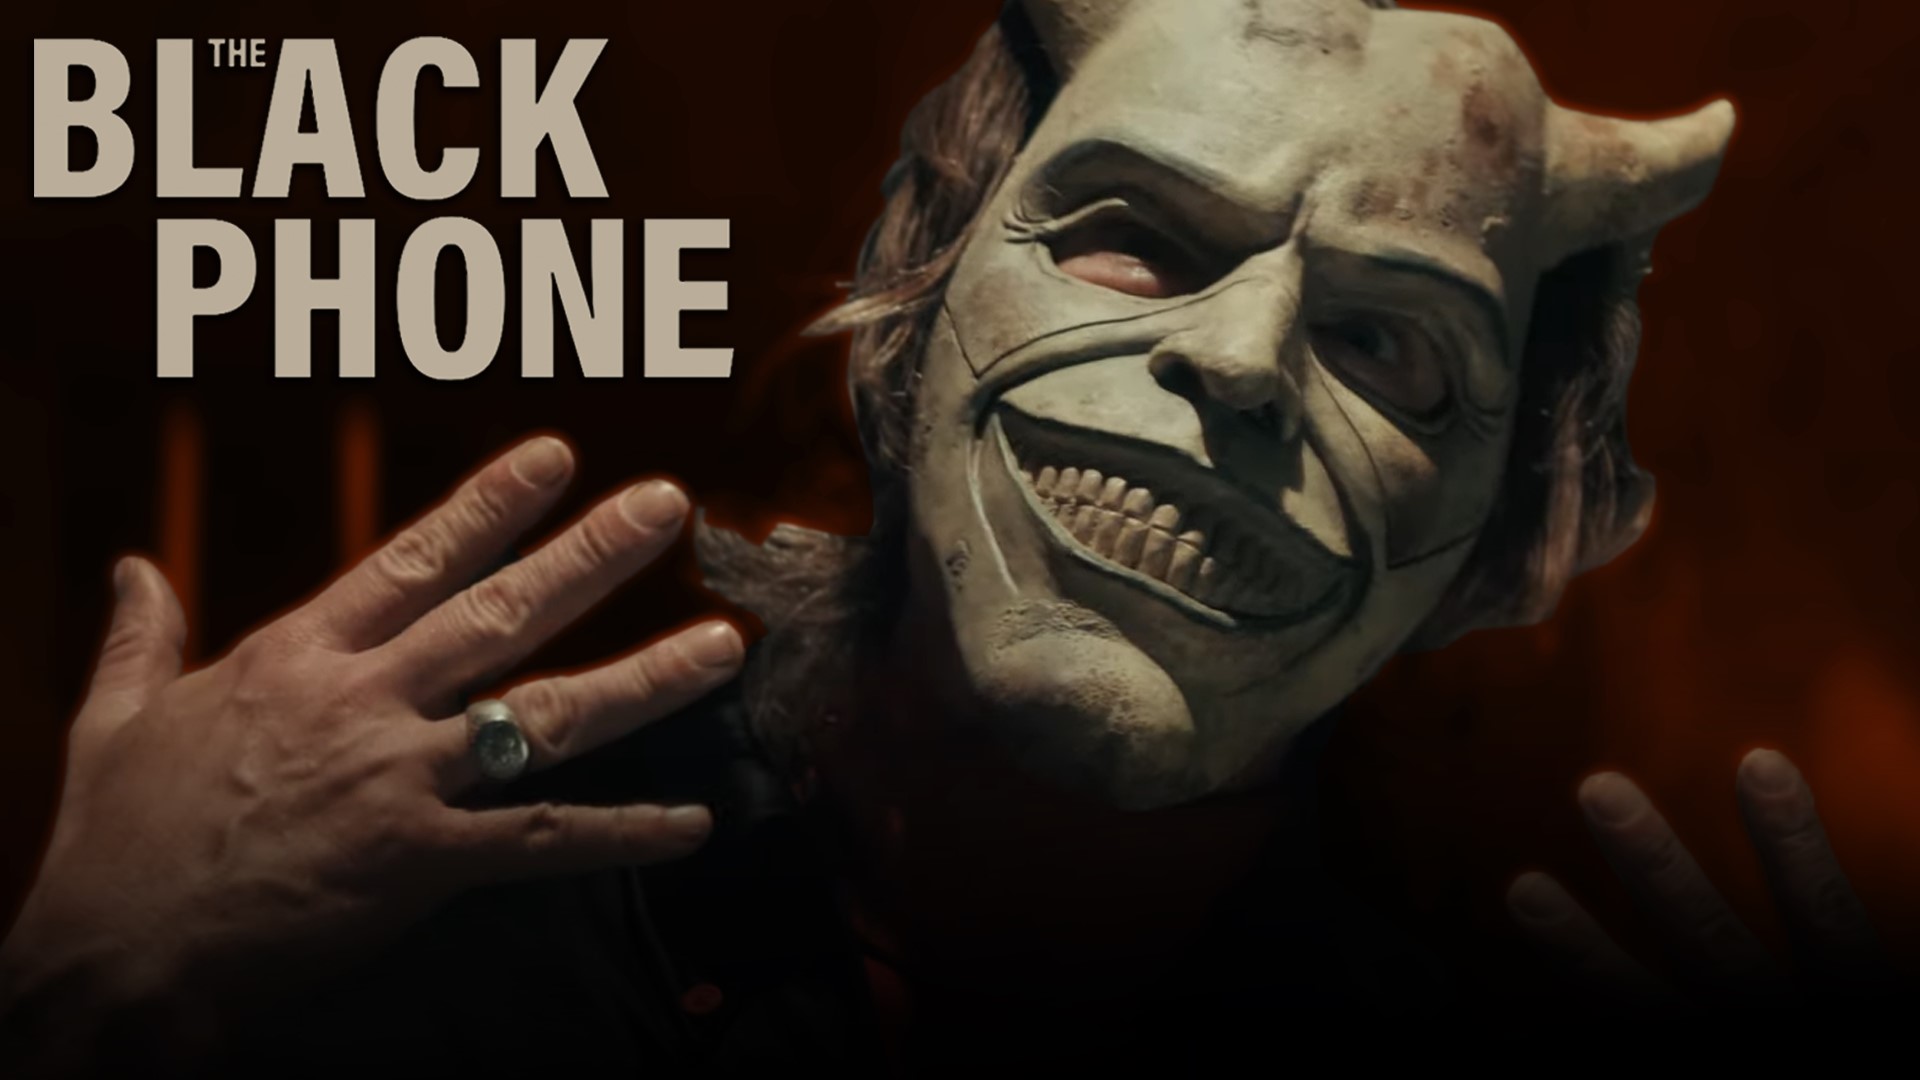 Ethan Hawke continues his streak of great roles this time with The Black Phone, an entertaining horror that uses past victims of a serial killer in an inventive way.